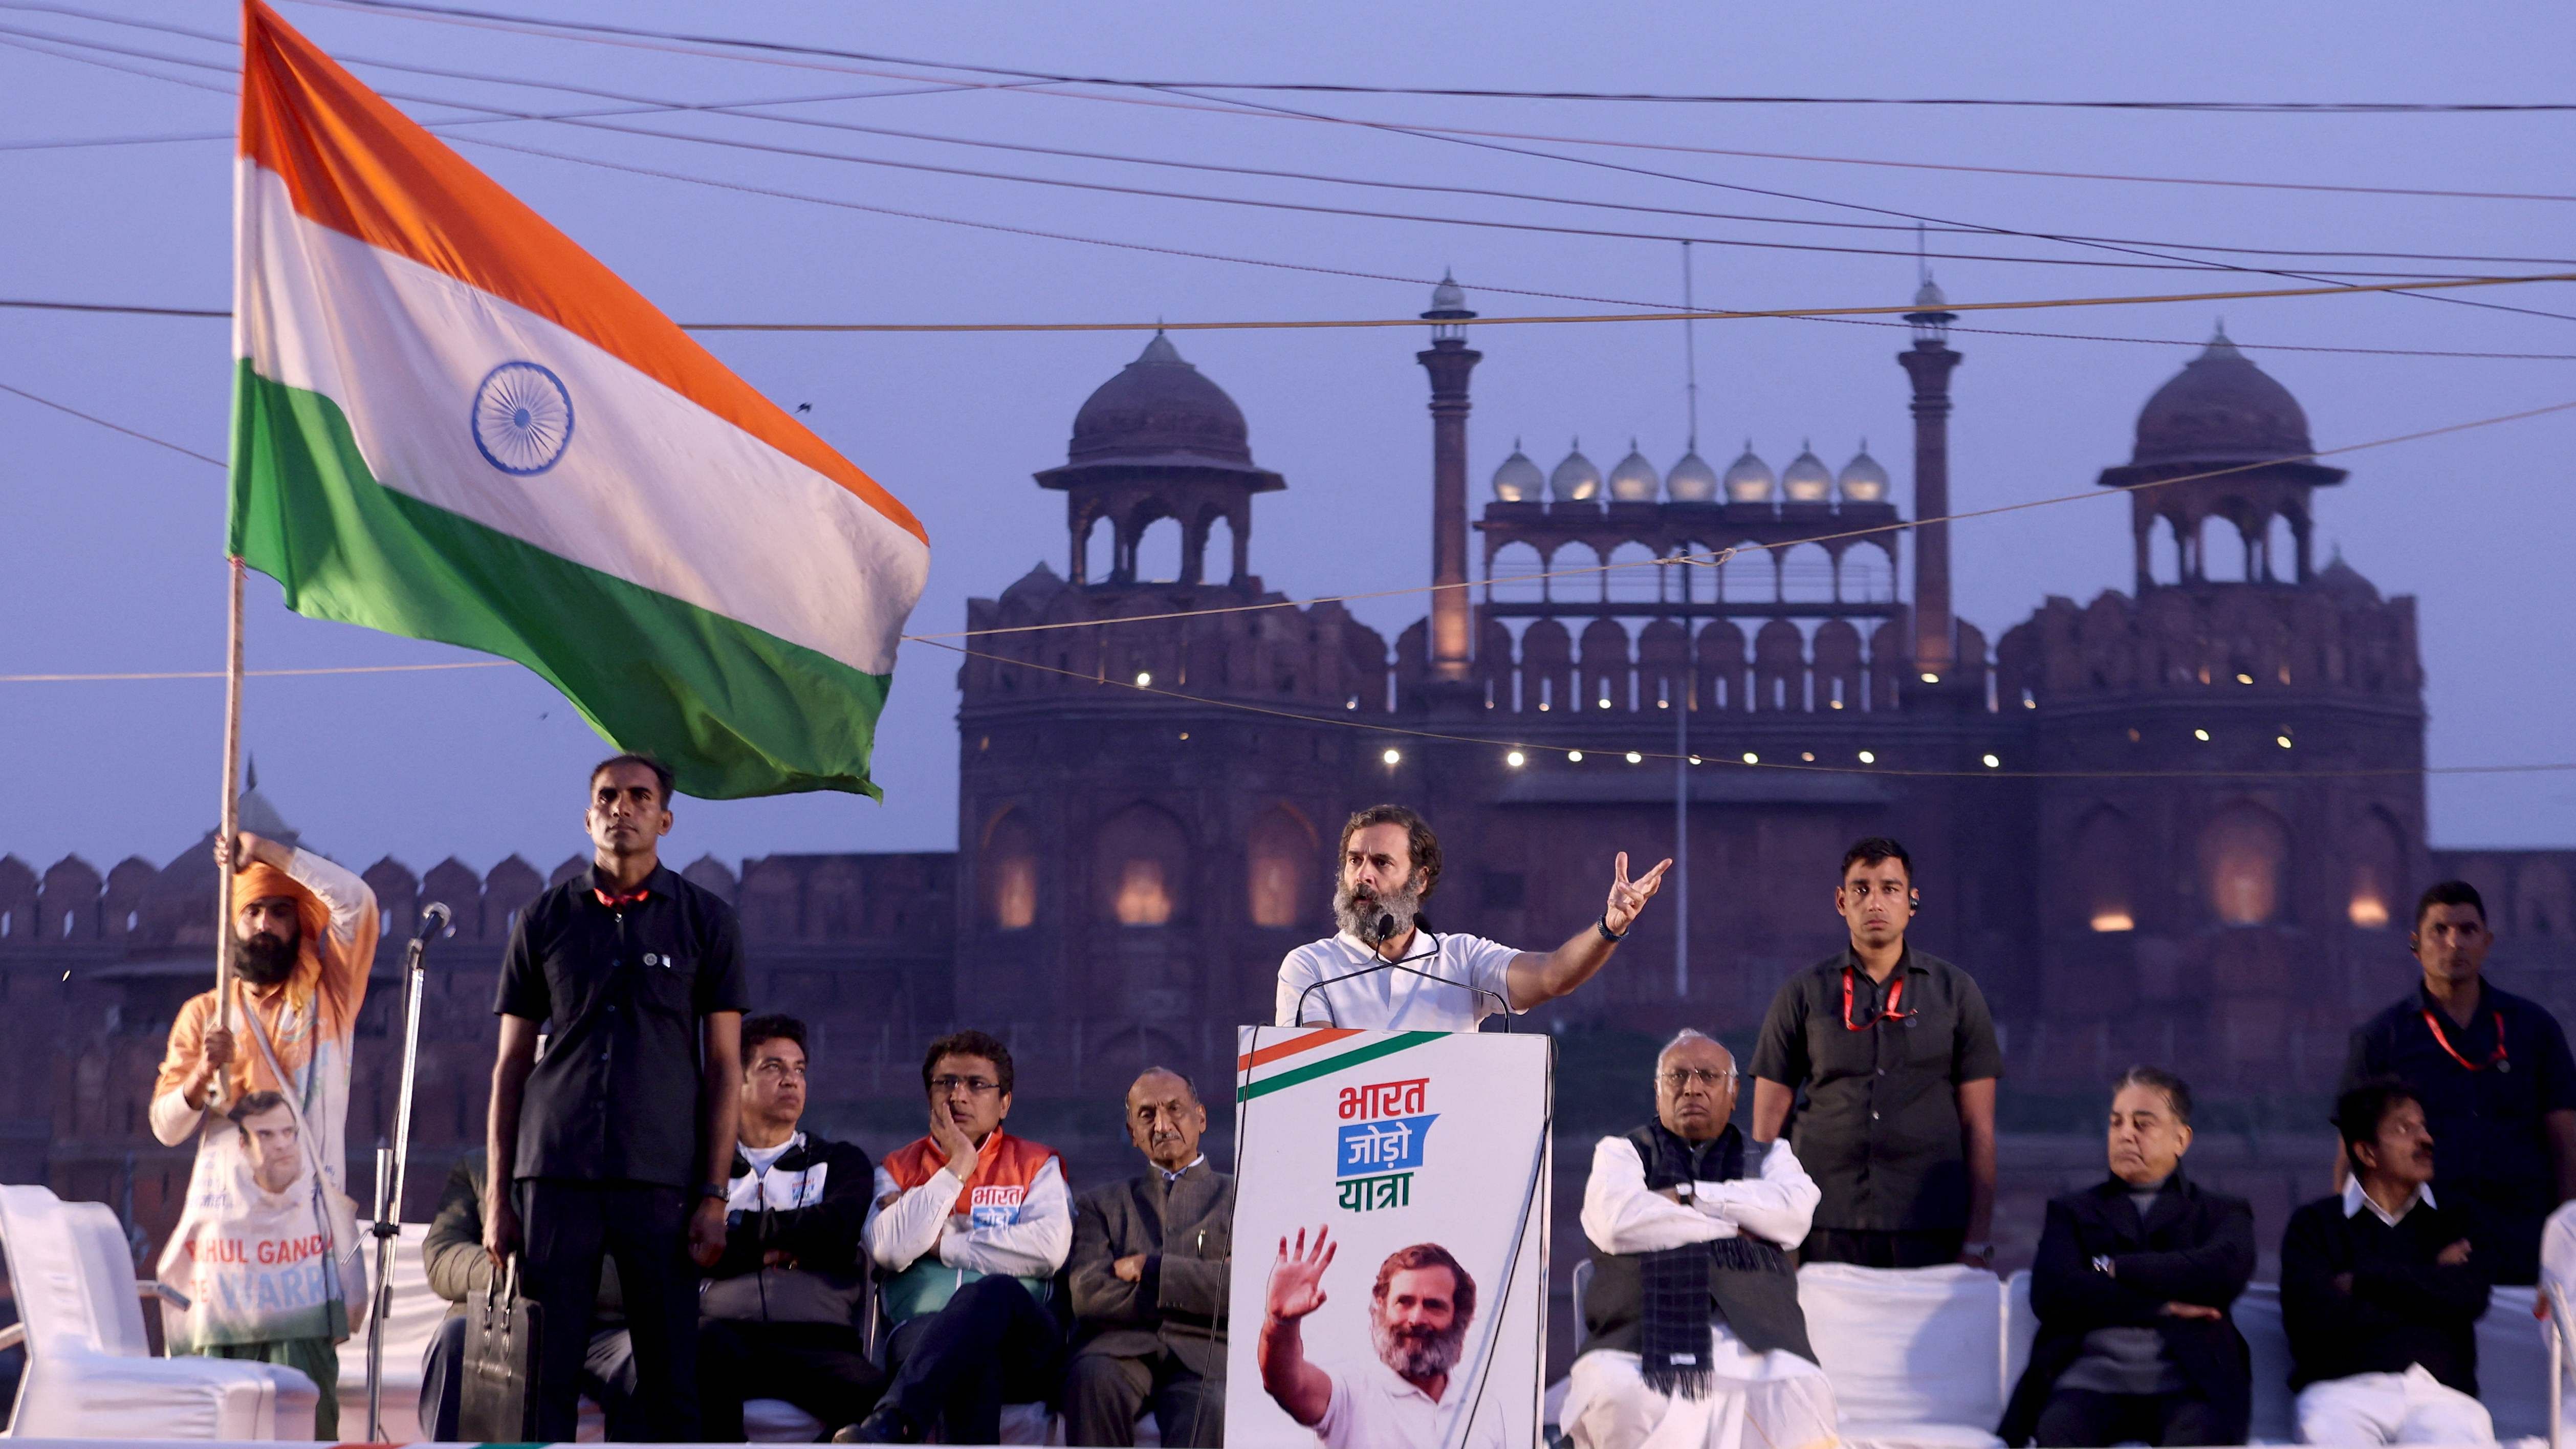 Rahul Gandhi addresses the crowd at the Red Fort. Credit: Reuters Photo